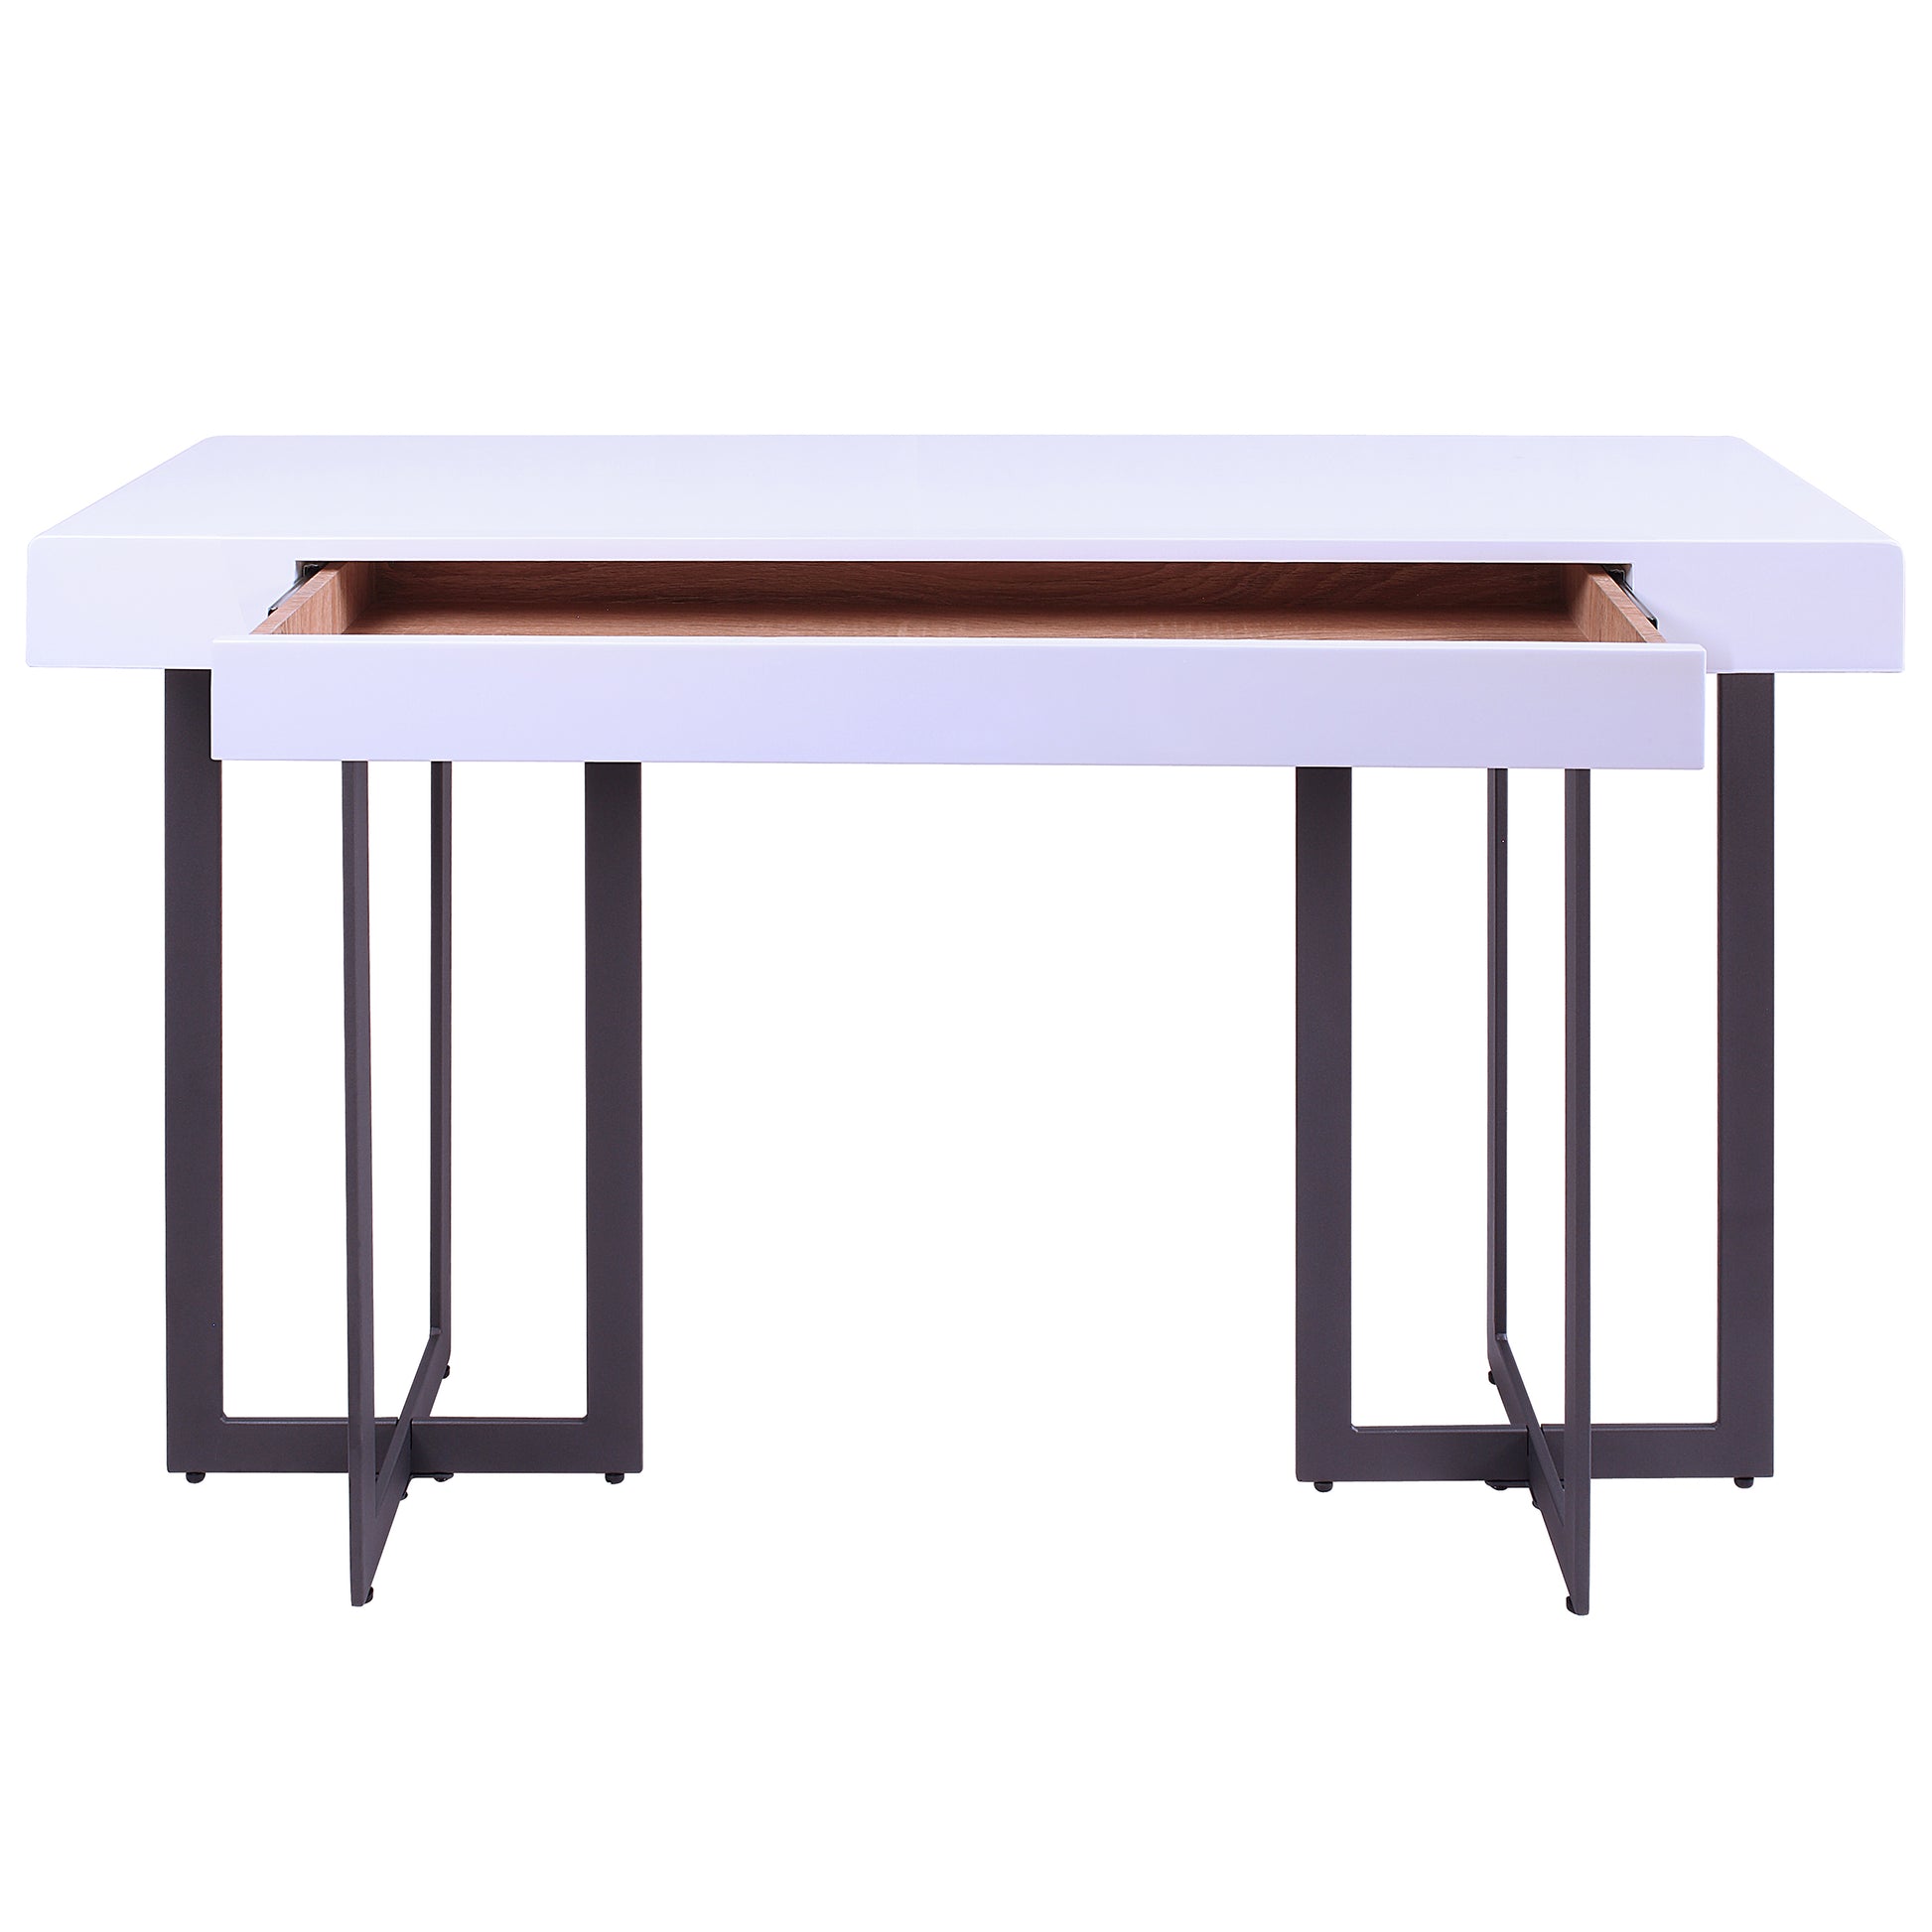 Front-facing modern white high gloss and gunmetal storage console table with a hidden drawer open on a white background